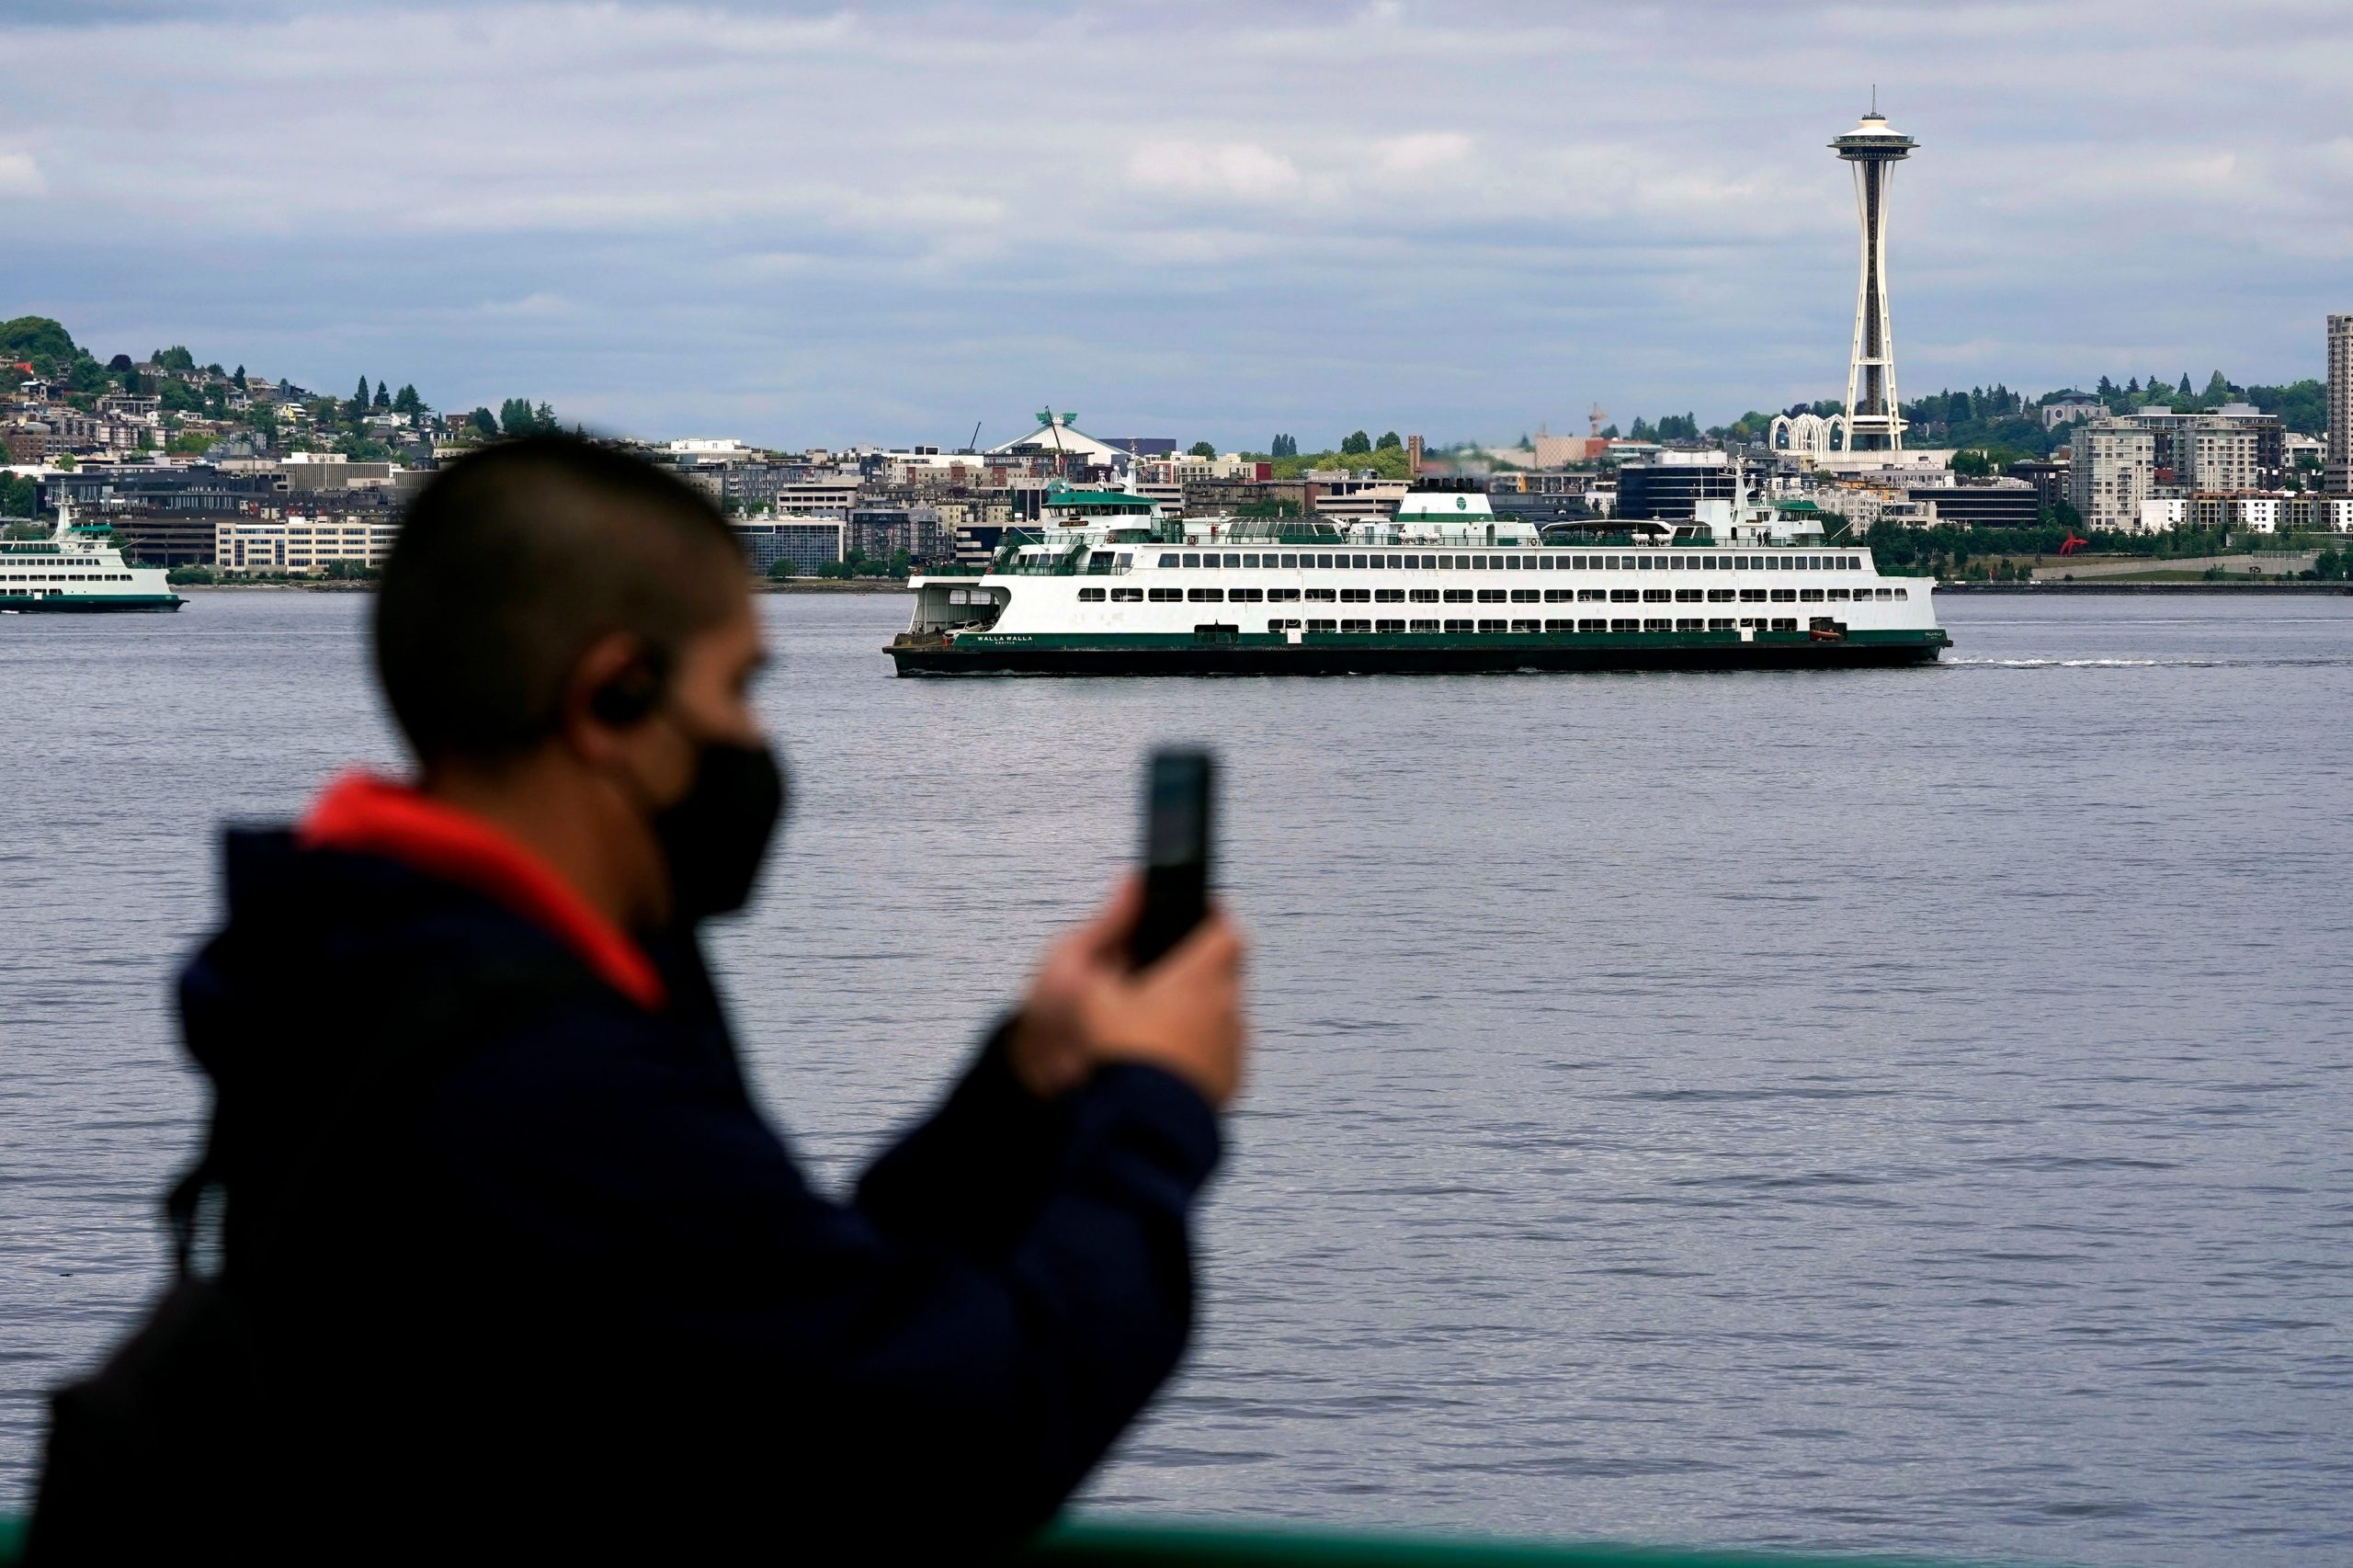 A passenger on a Washington state ferry with the Space Needle behind him